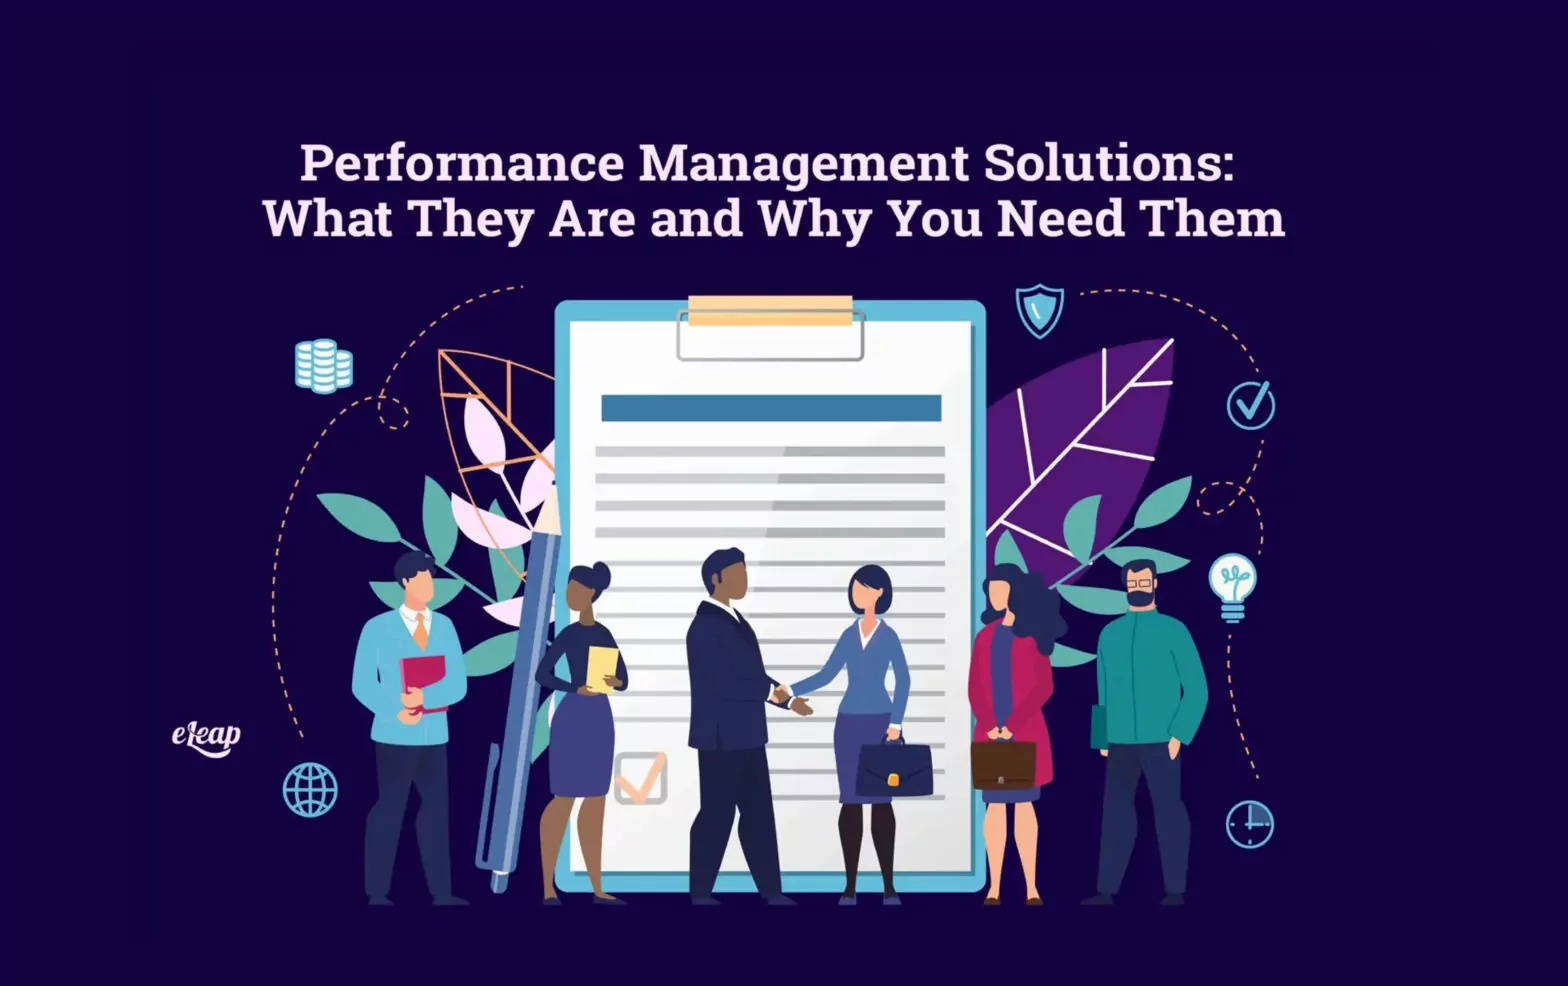 Performance Management Solutions: What They Are and Why You Need Them